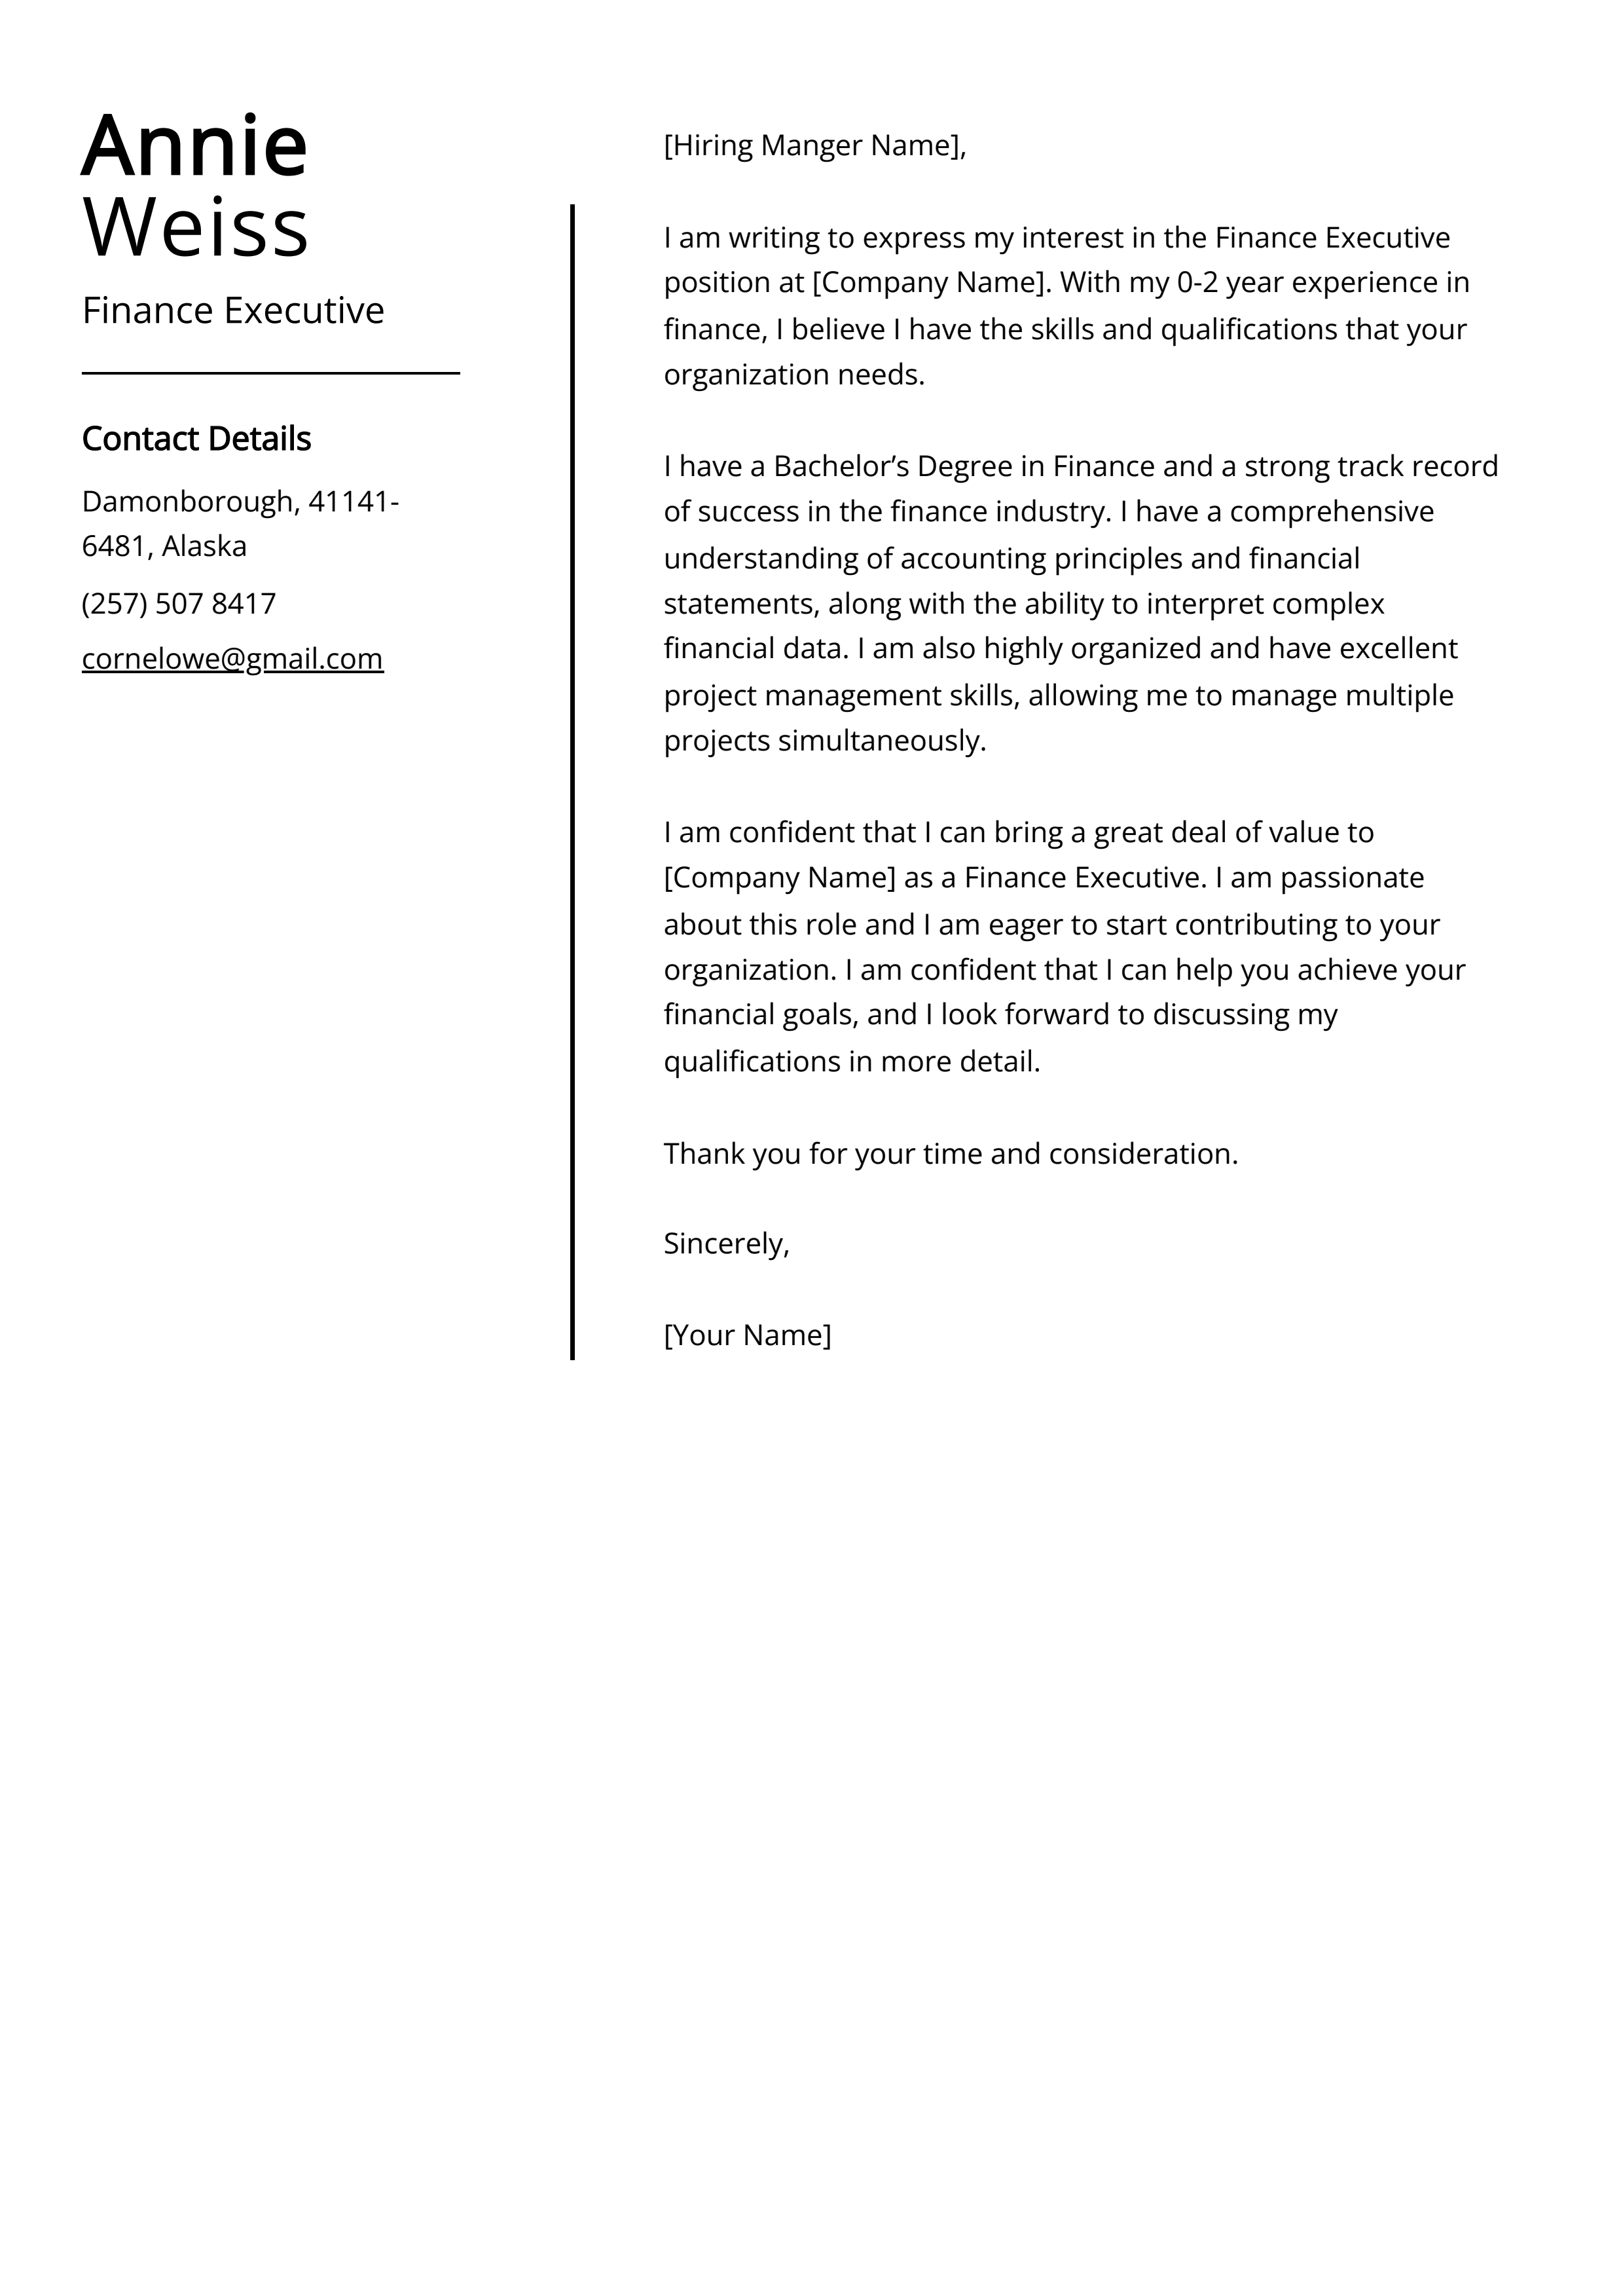 Finance Executive Cover Letter Example